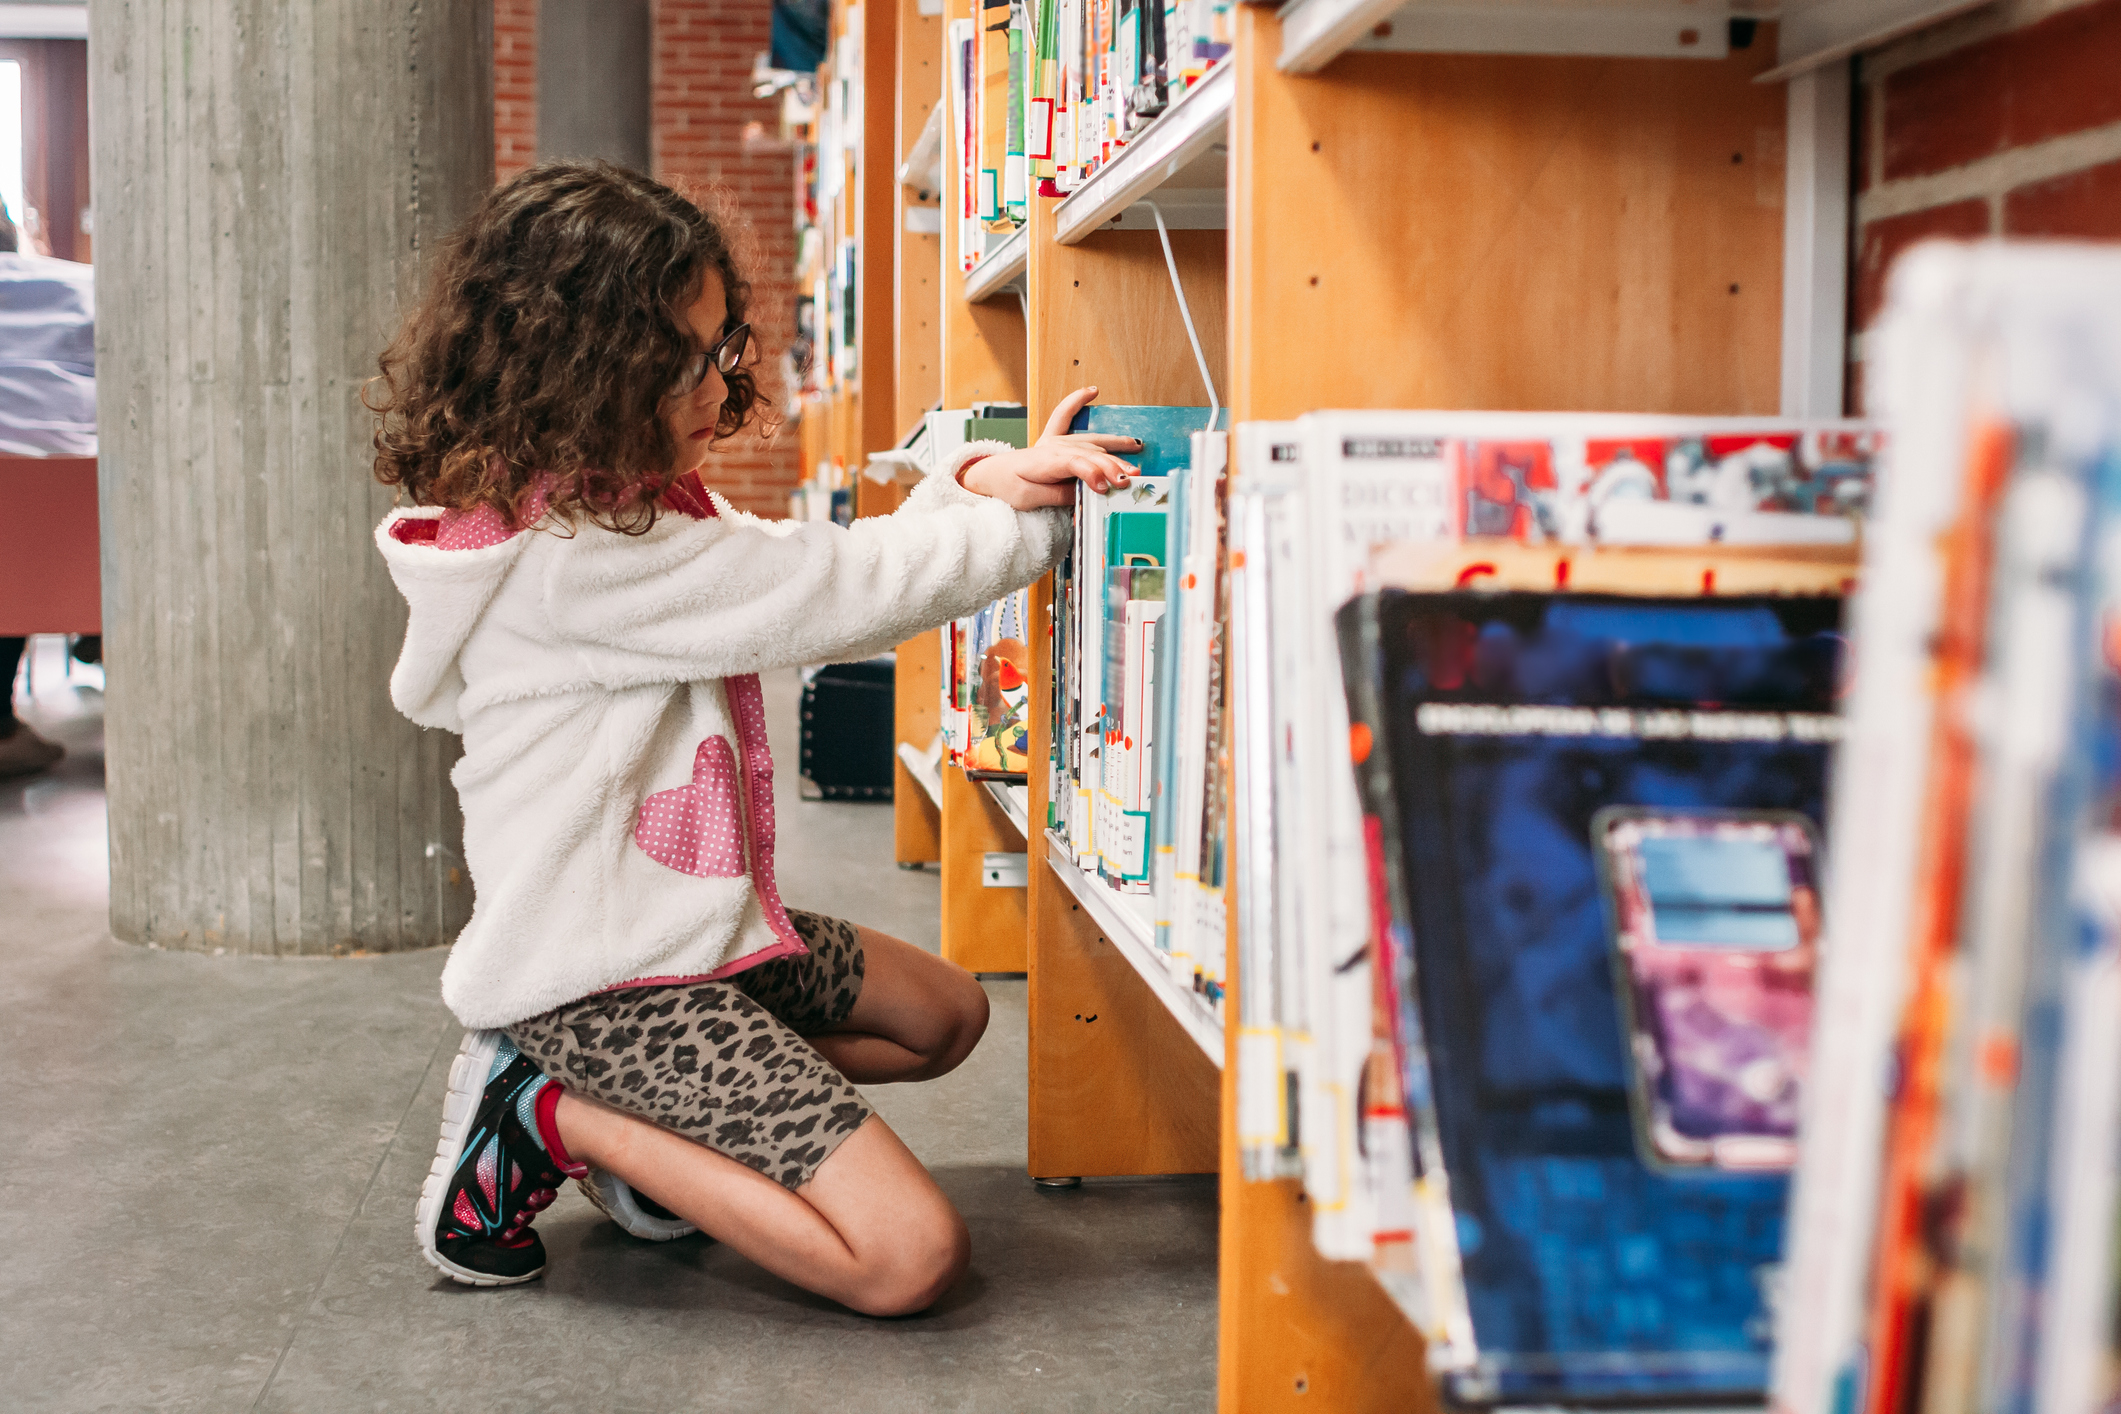 A little girl is browsing for books at the library